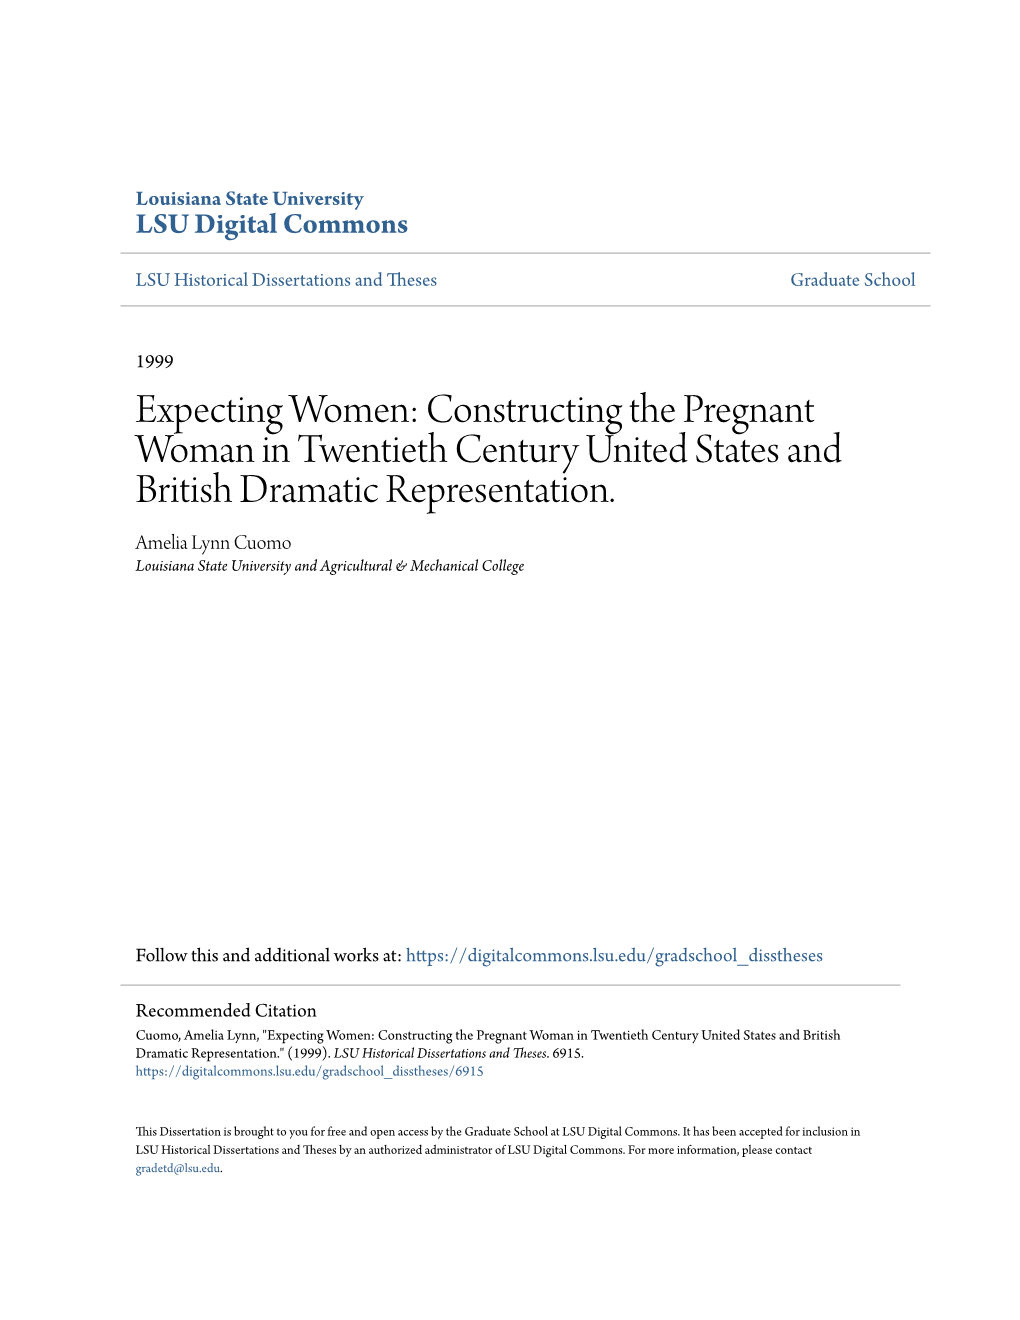 Expecting Women: Constructing the Pregnant Woman in Twentieth Century United States and British Dramatic Representation